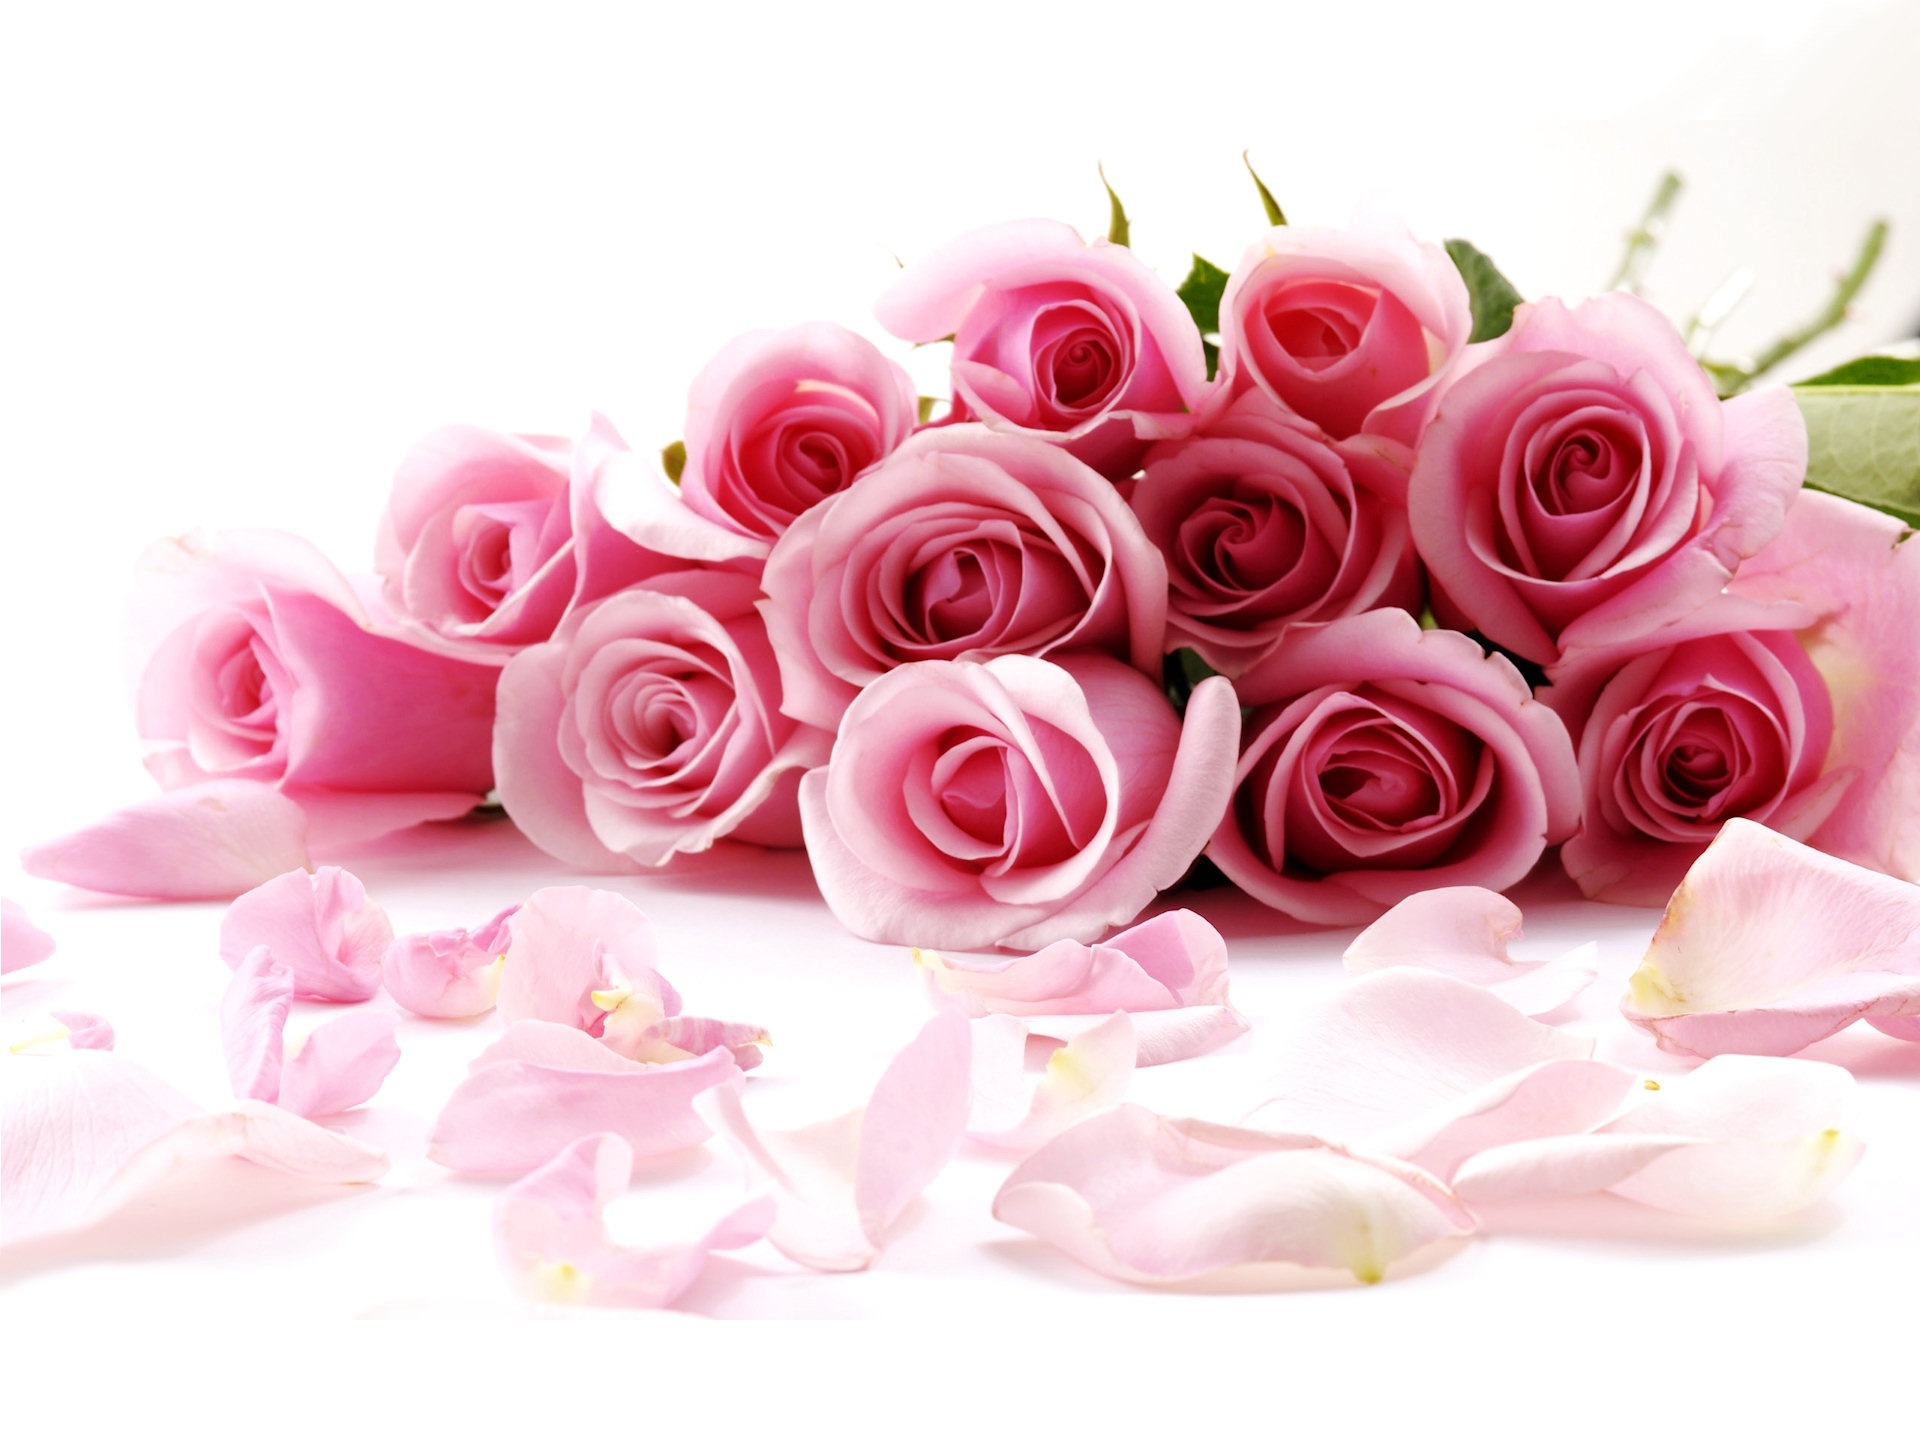 Pink roses on a pastel background - a charming HD desktop wallpaper.